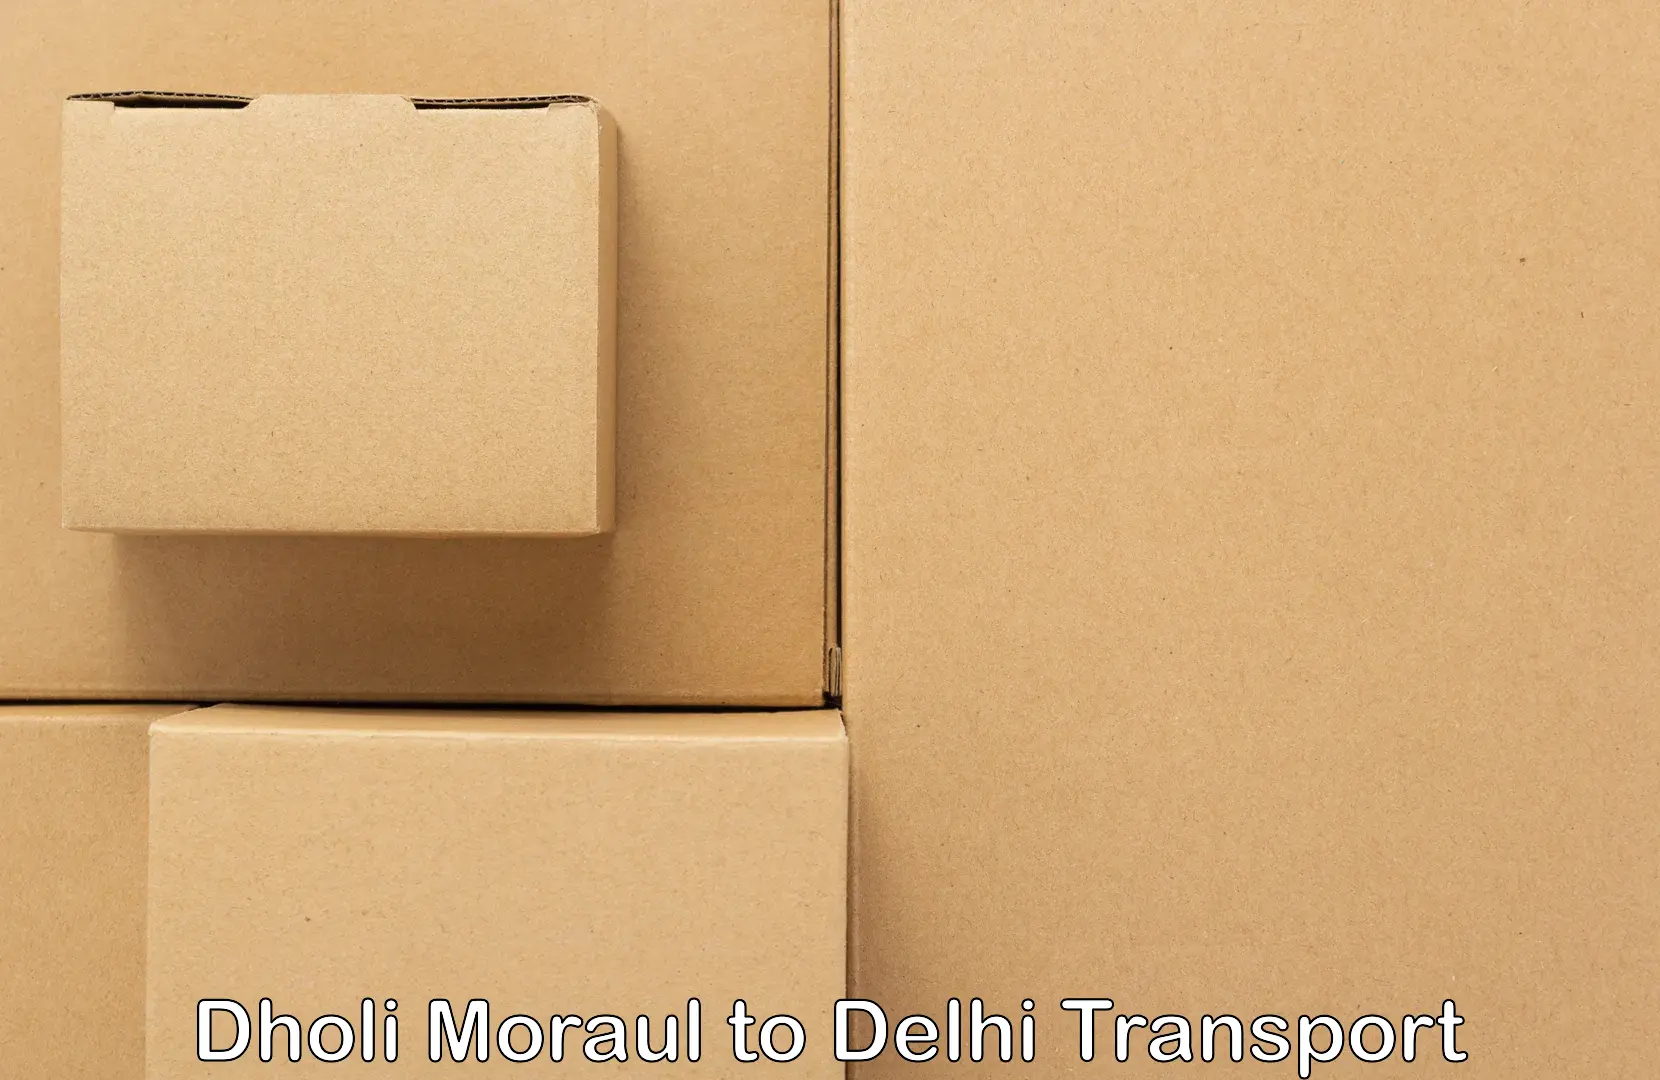 Container transport service Dholi Moraul to Lodhi Road